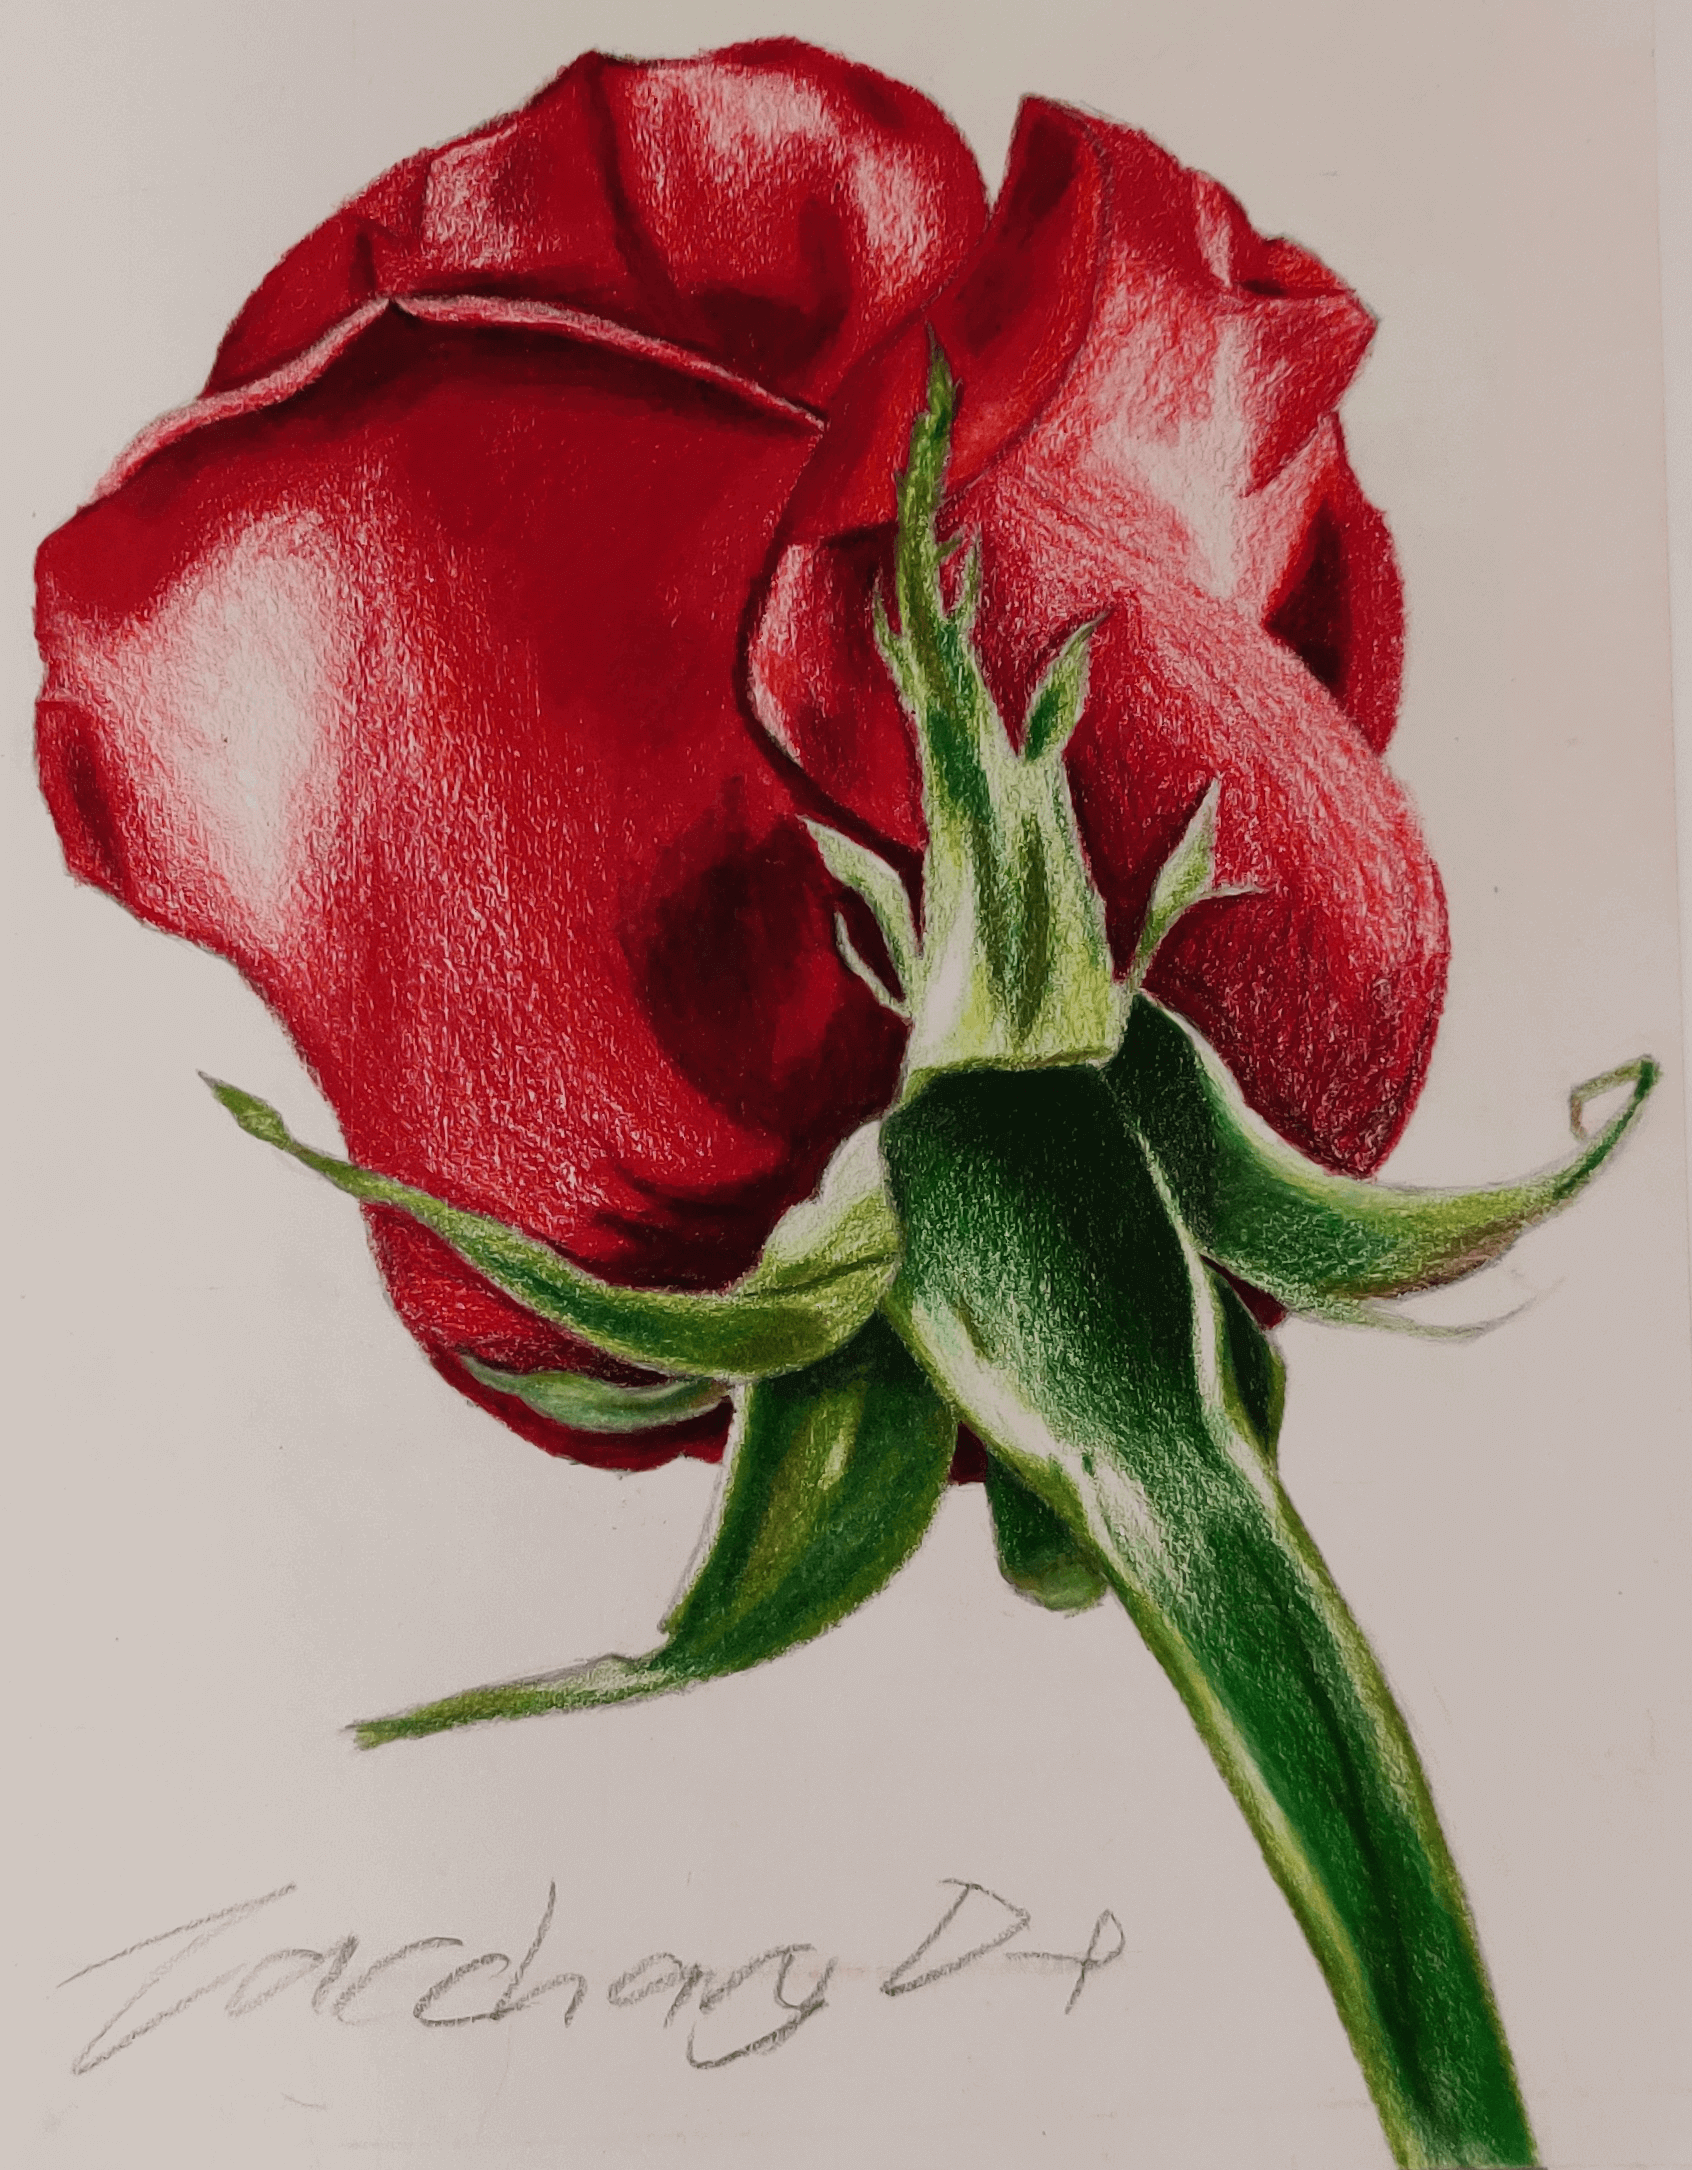 A colour value drawing of a rose done in pencil crayon.